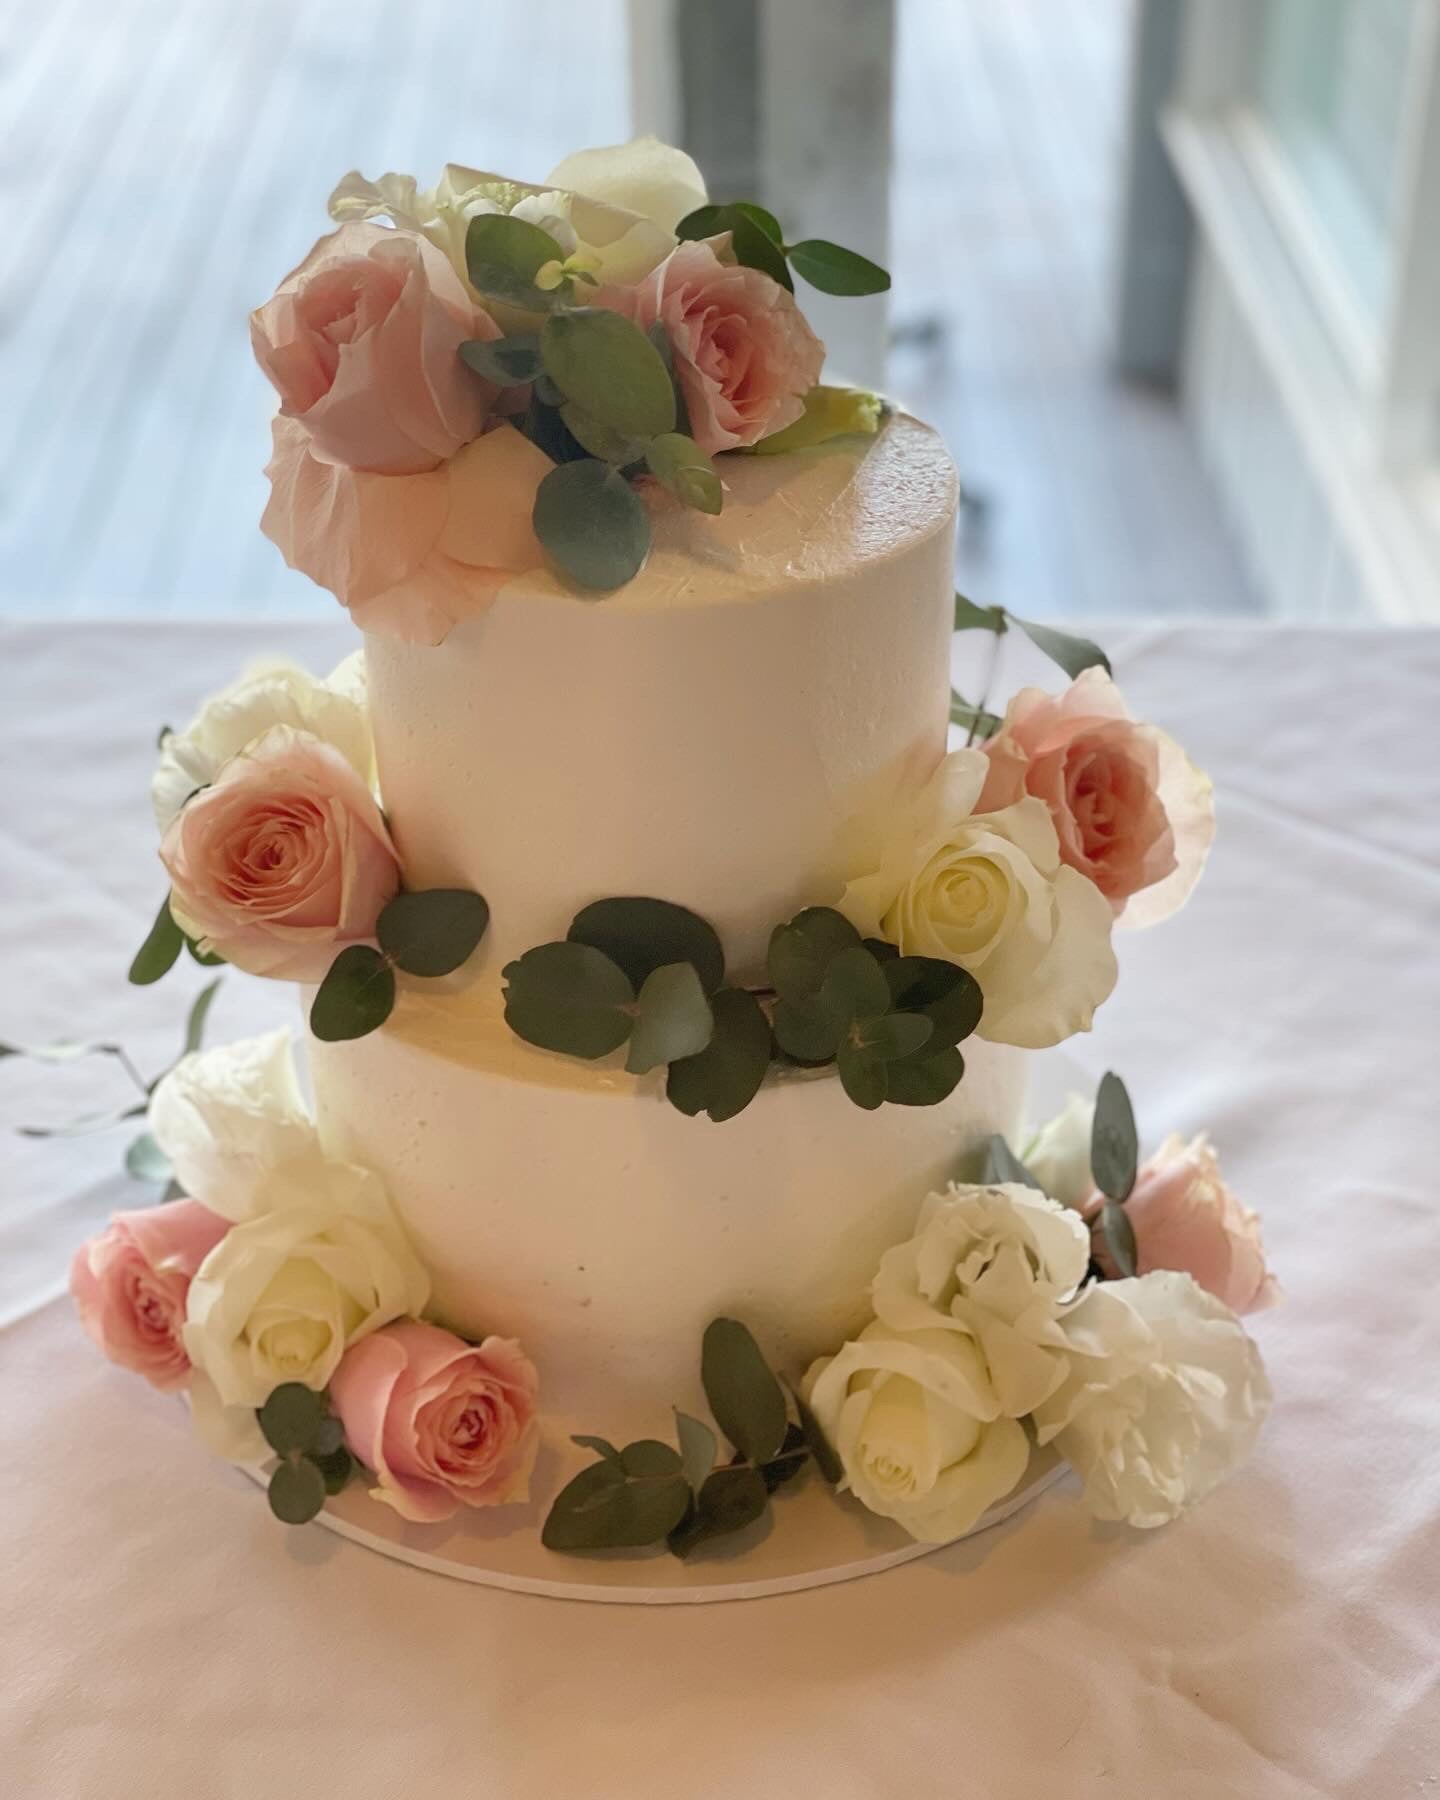 2 Tier Buttercream with Scatted flowers